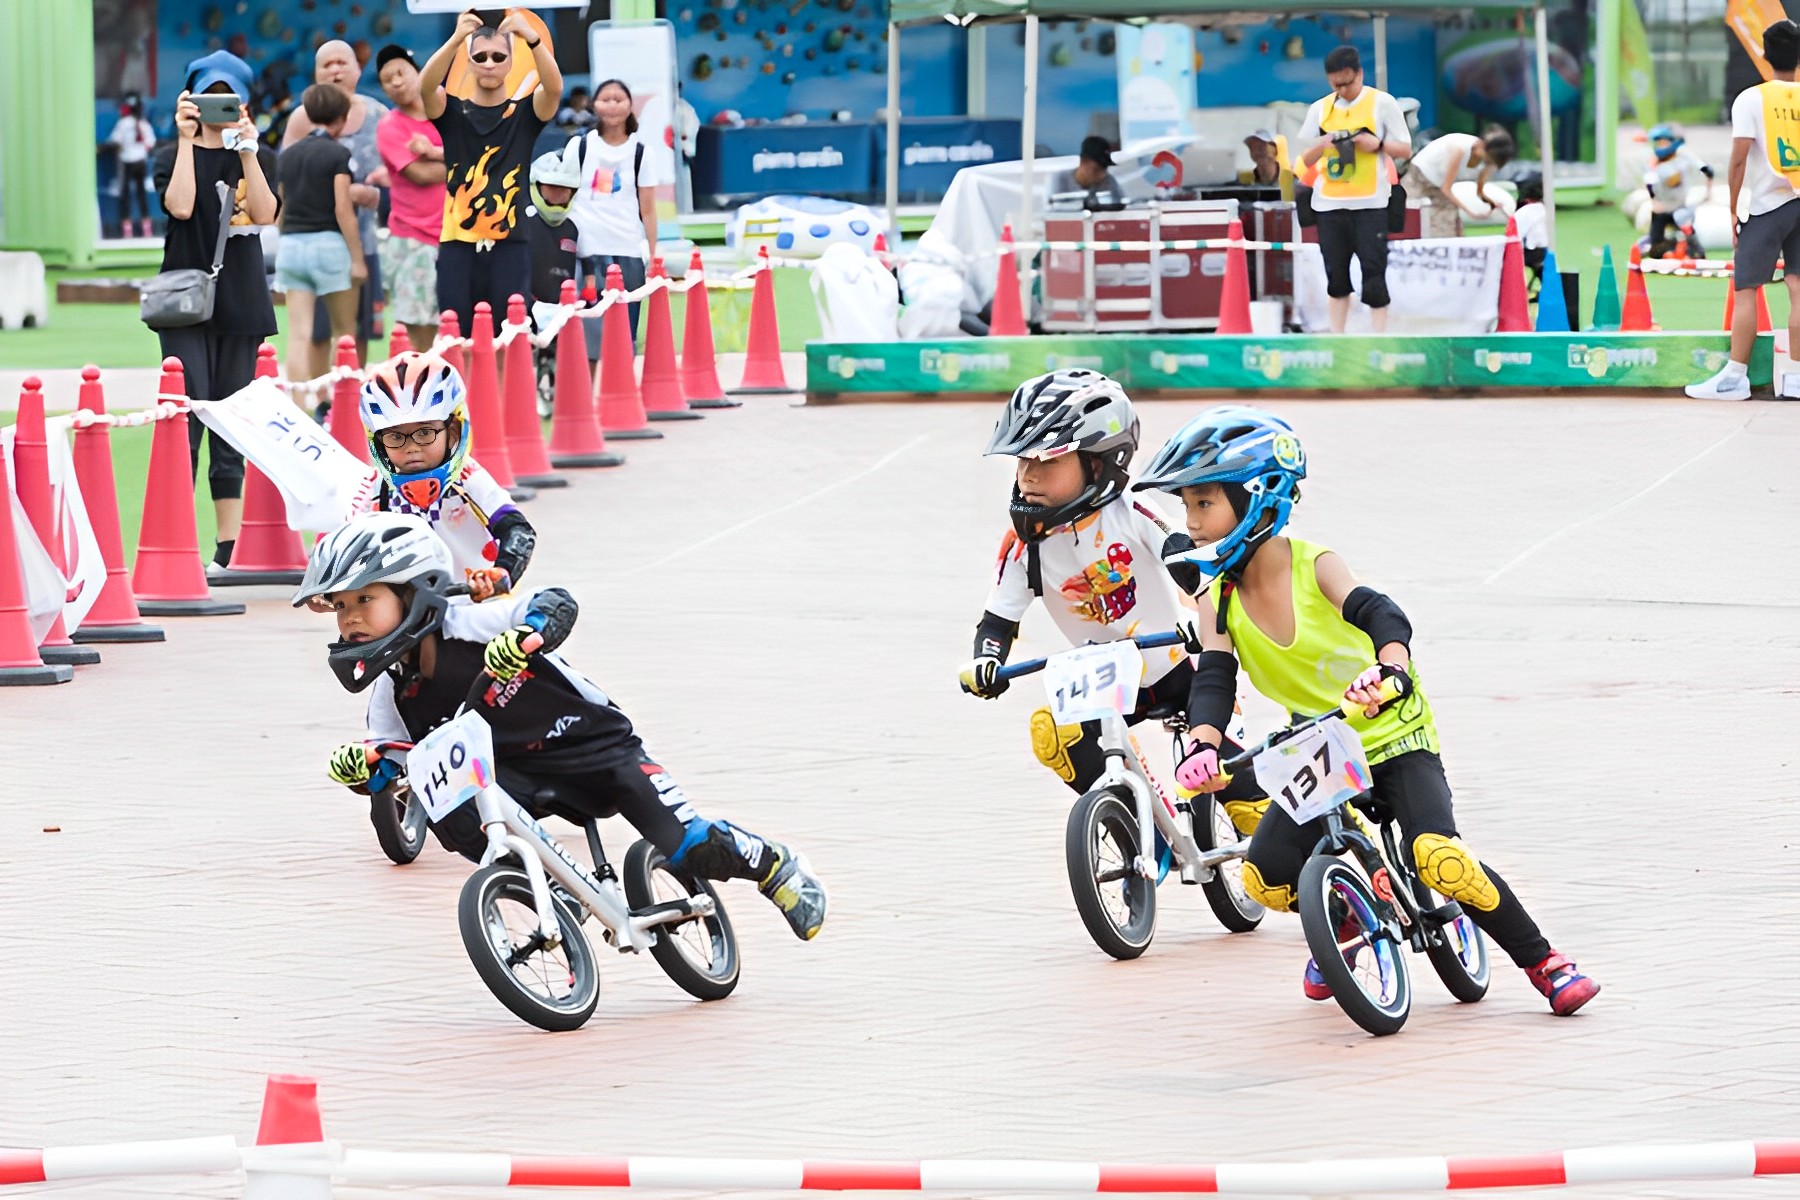 Kids can compete in balance bike racing competitions at the festival.